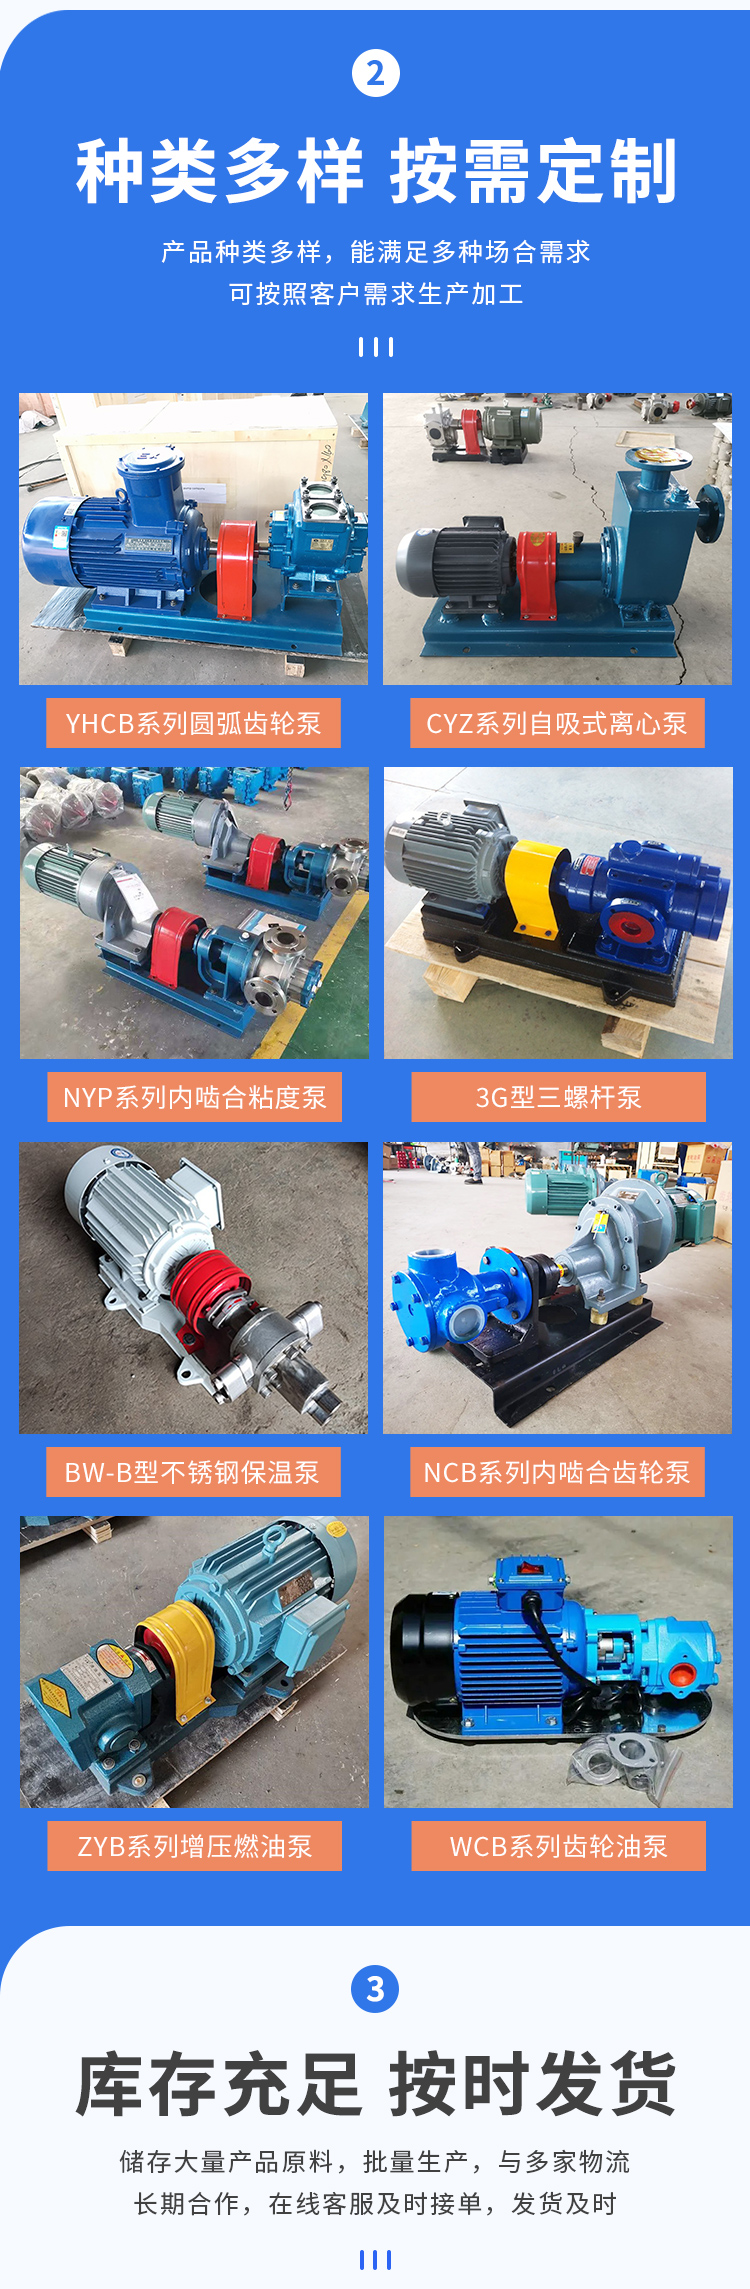 High pressure gear pump ignition oil pump ZYB series turbocharged fuel pump customized according to needs